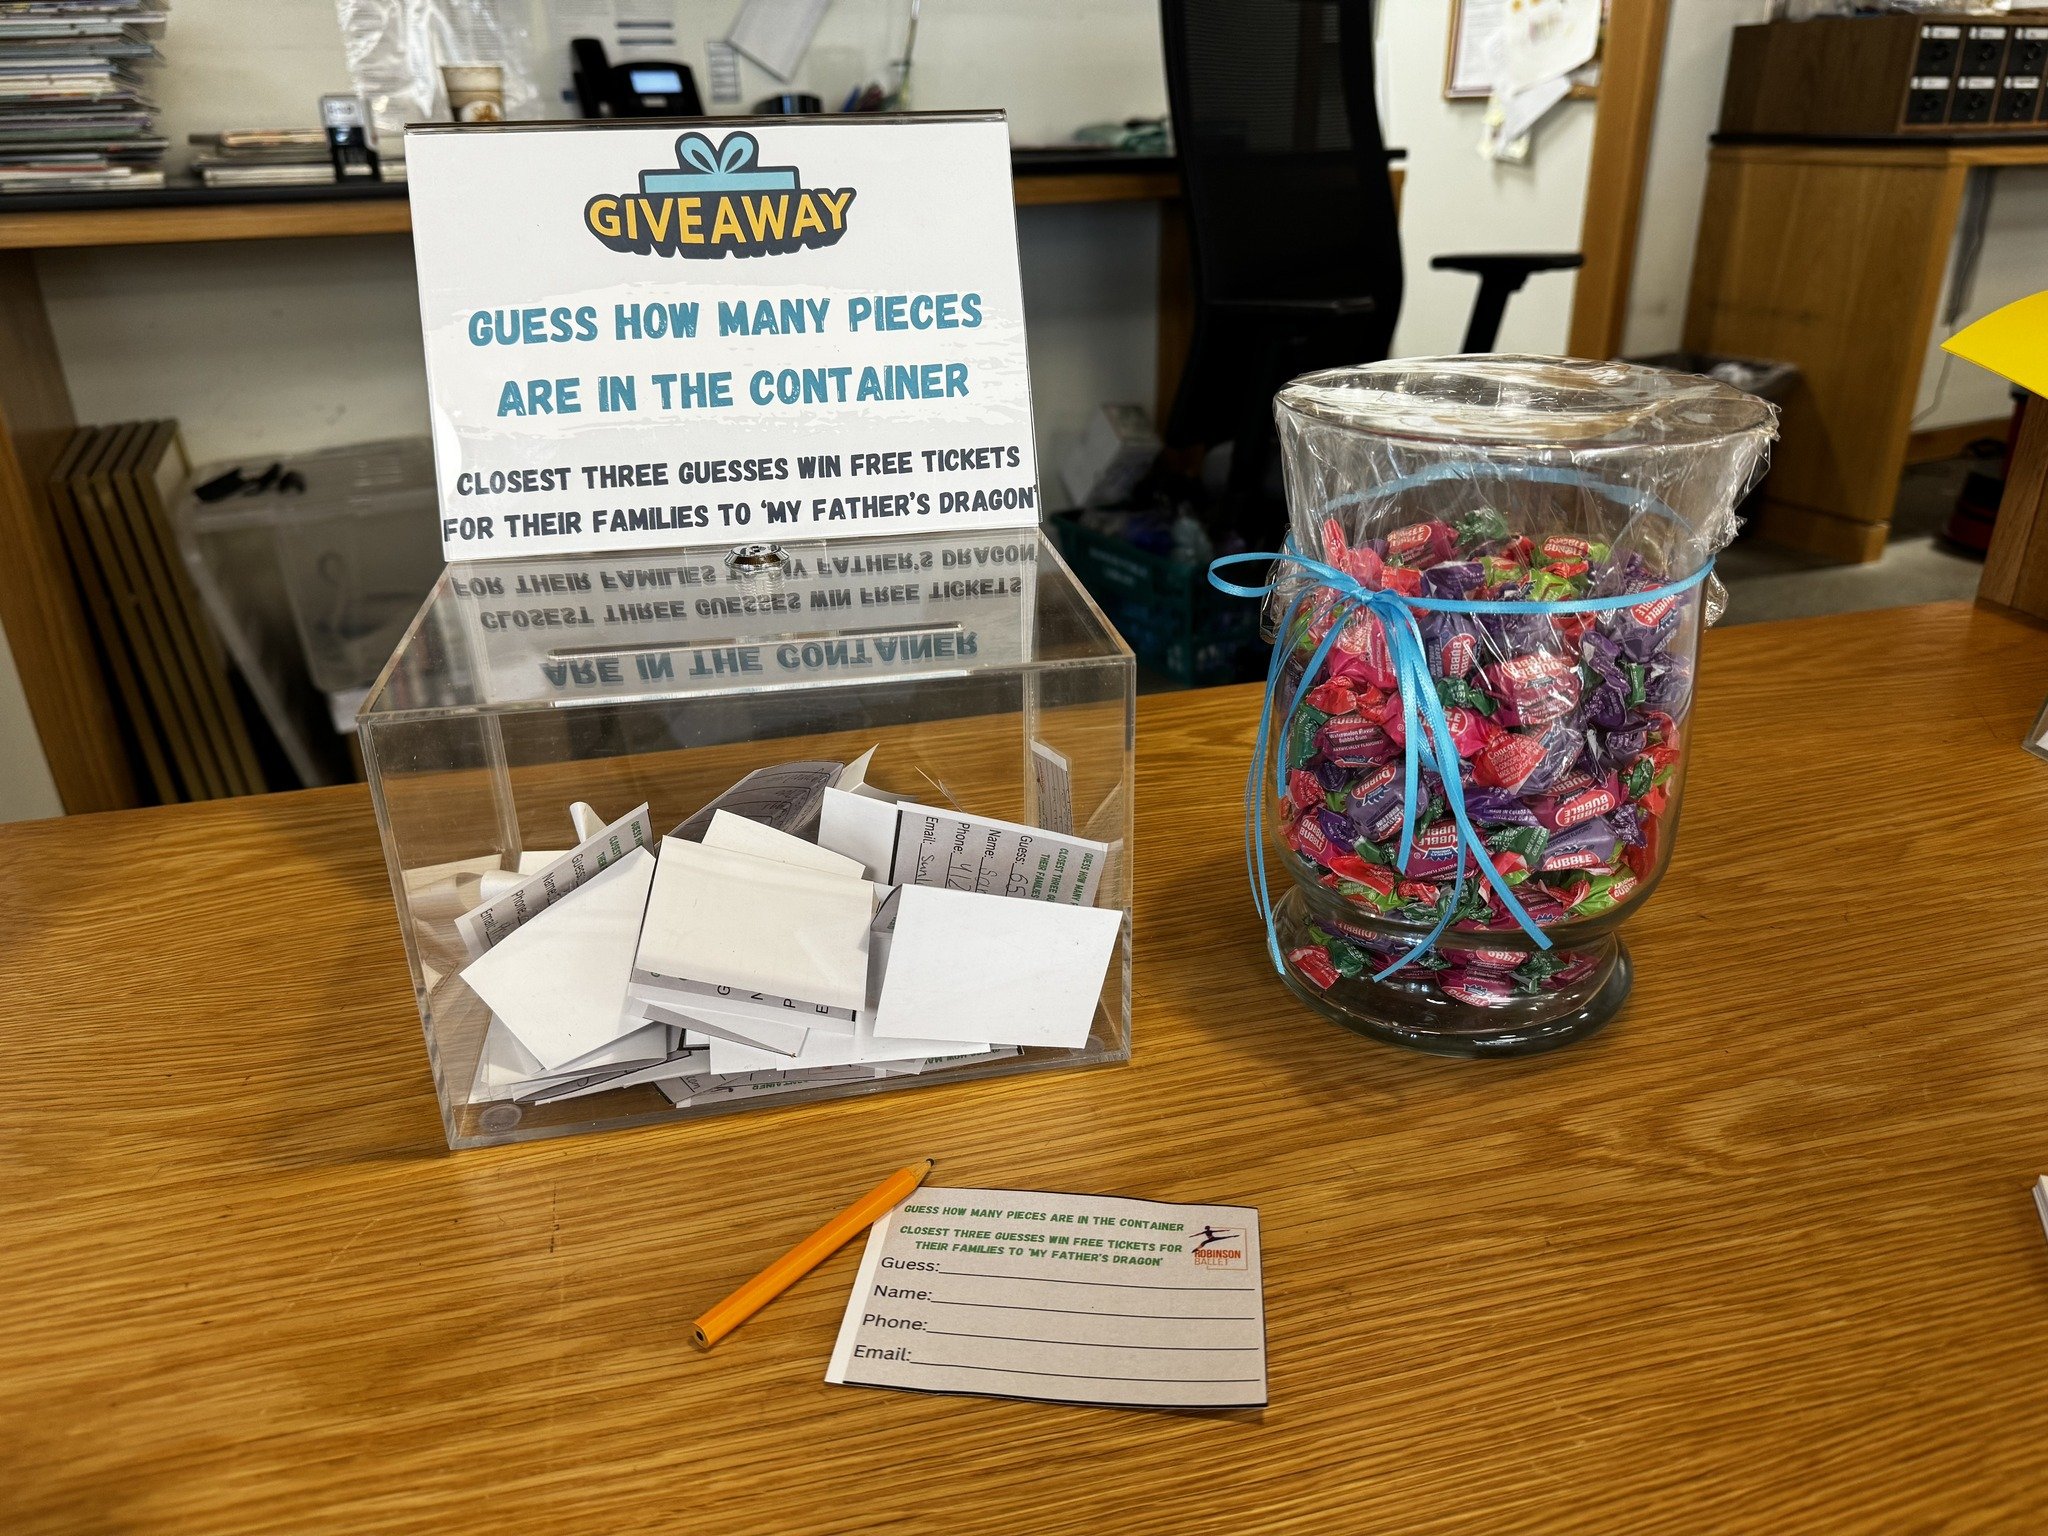 Lots of guesses have been made and there's still time to add yours!

Stop in to the Bangor Public Library and visit the Children's Department front desk to make your best guess at how many pieces of gum are in the jar. The closest three guesses will 